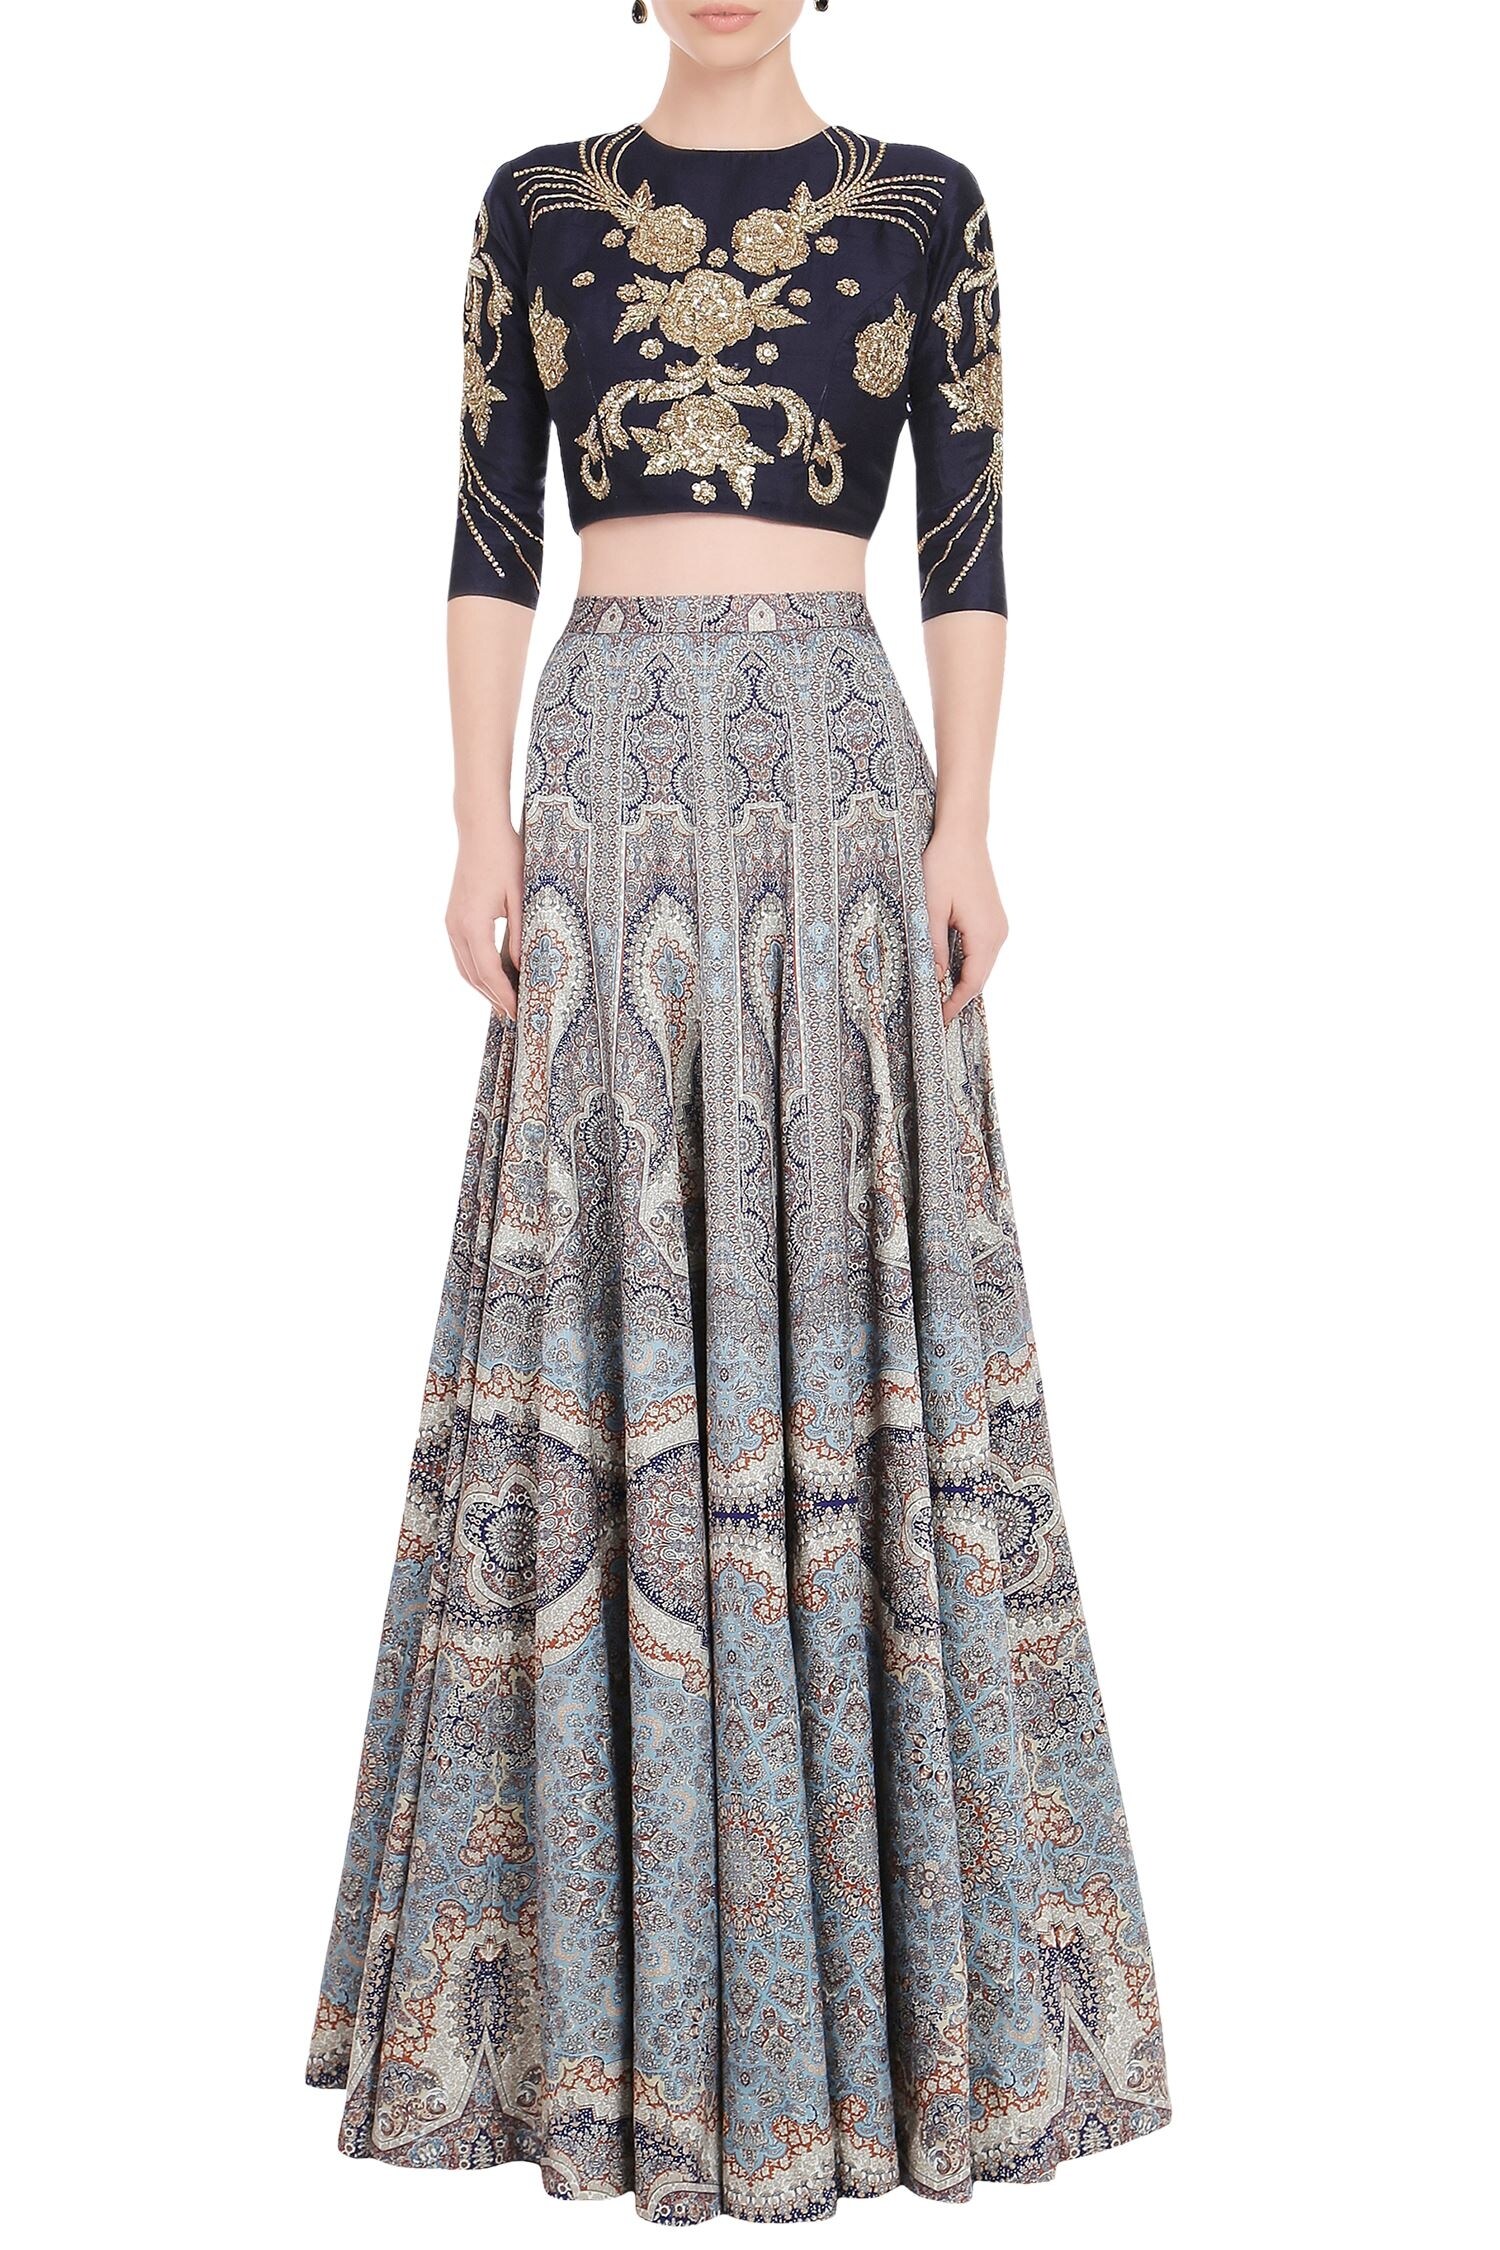 Buy Multi colored printed lehenga set with embroidered blouse by ...